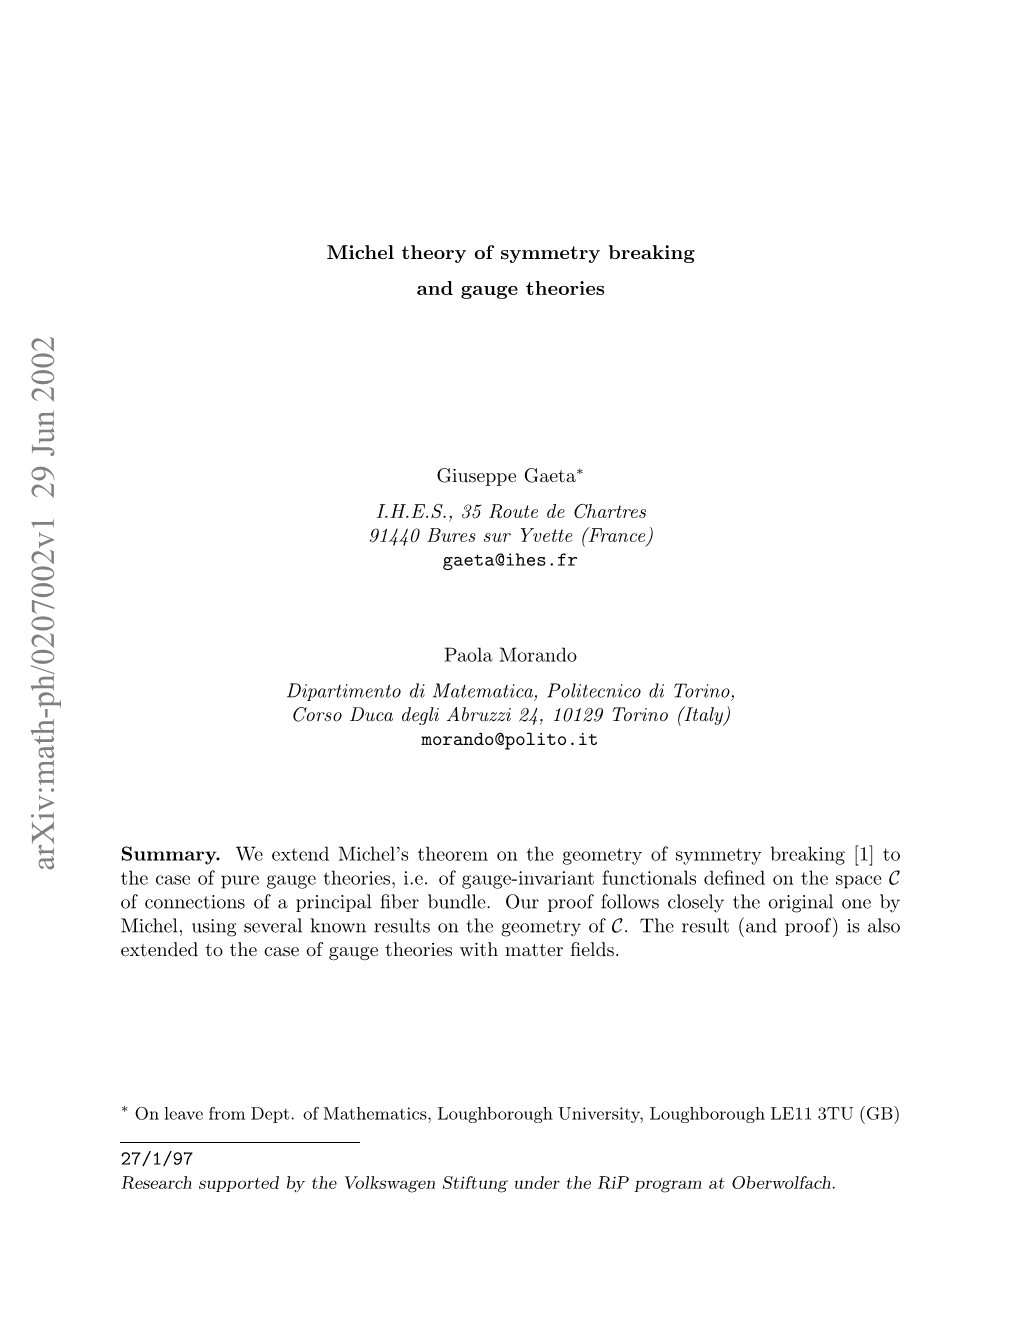 Michel Theory of Symmetry Breaking and Gauge Theories